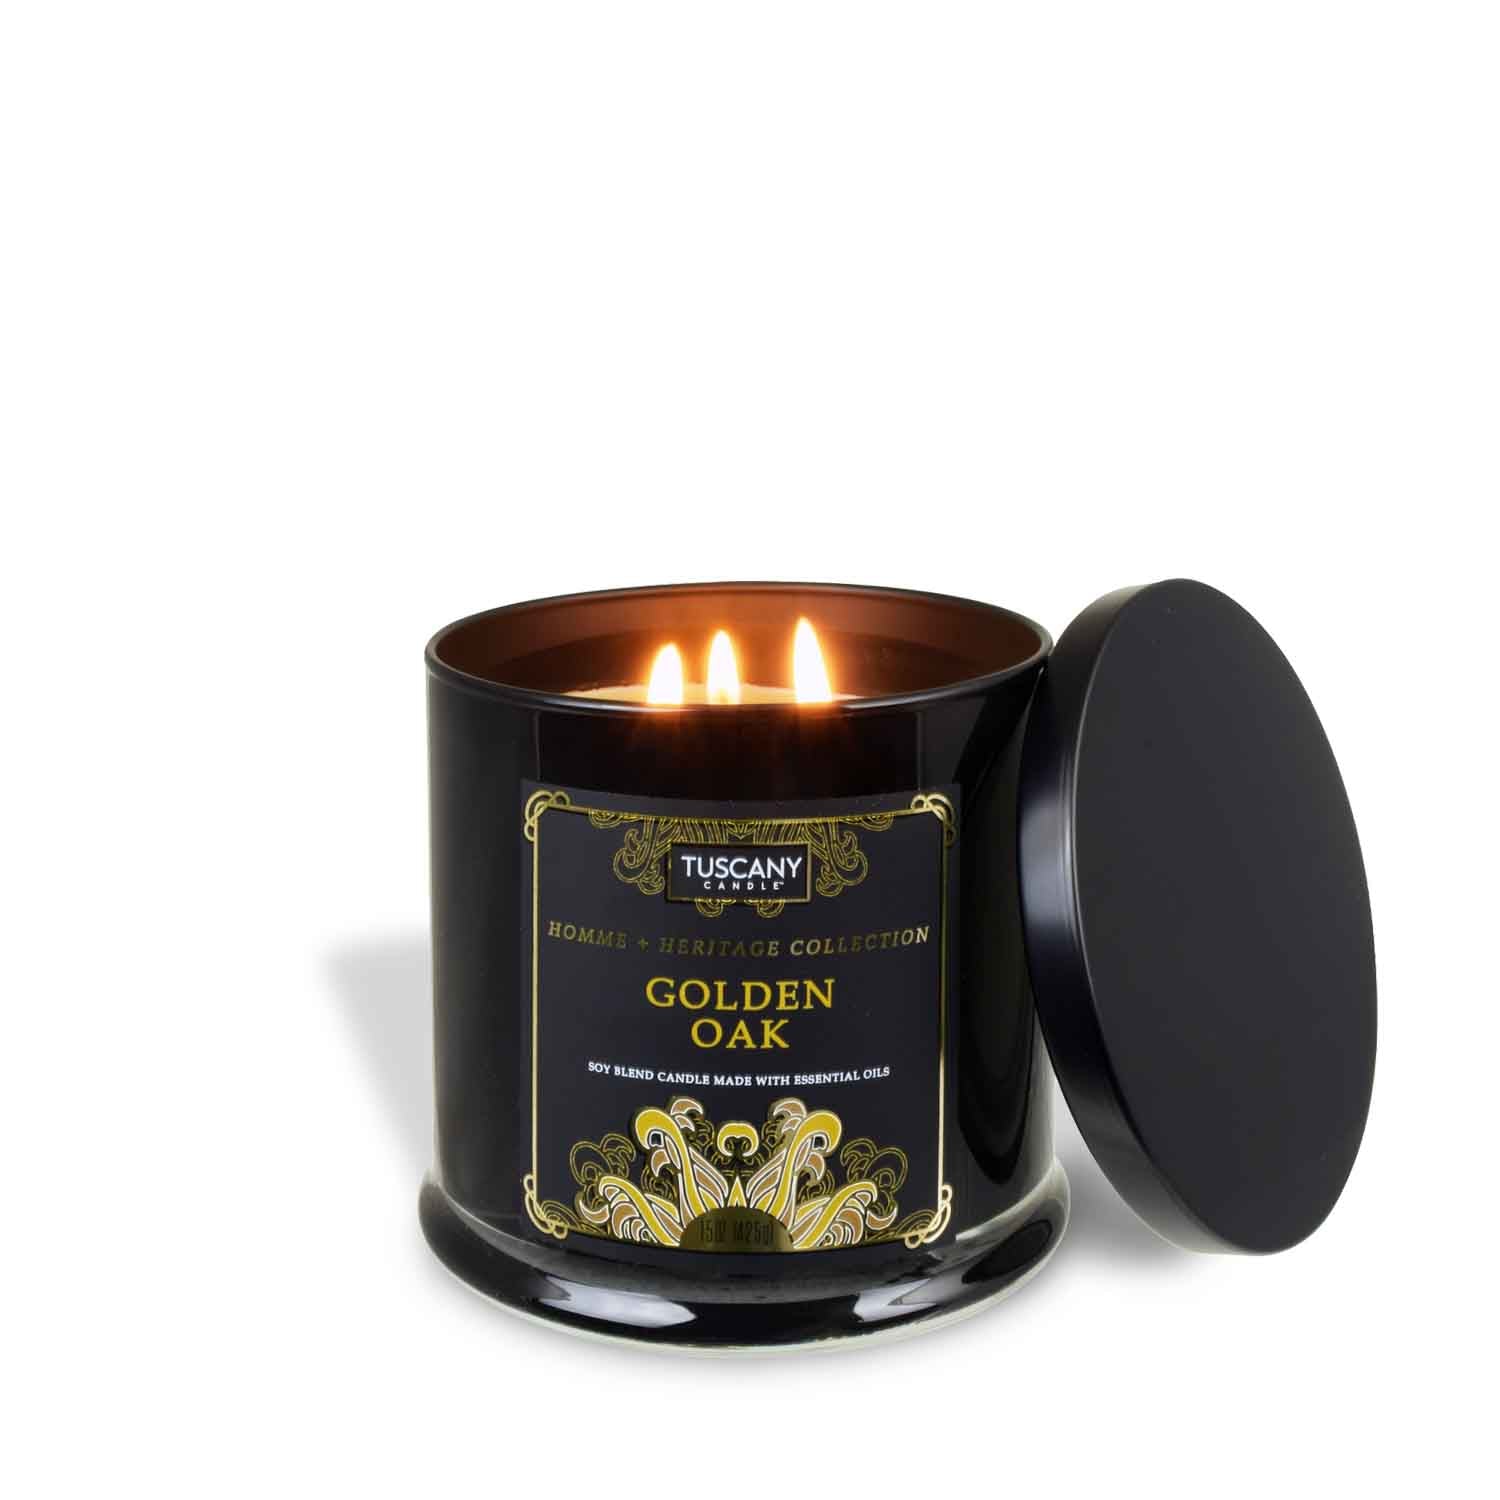 The Golden Oak Scented Jar Candle (15 oz) from the Homme + Heritage Collection by Tuscany Candle features a captivating fragrance and is encased in a sleek black tin.